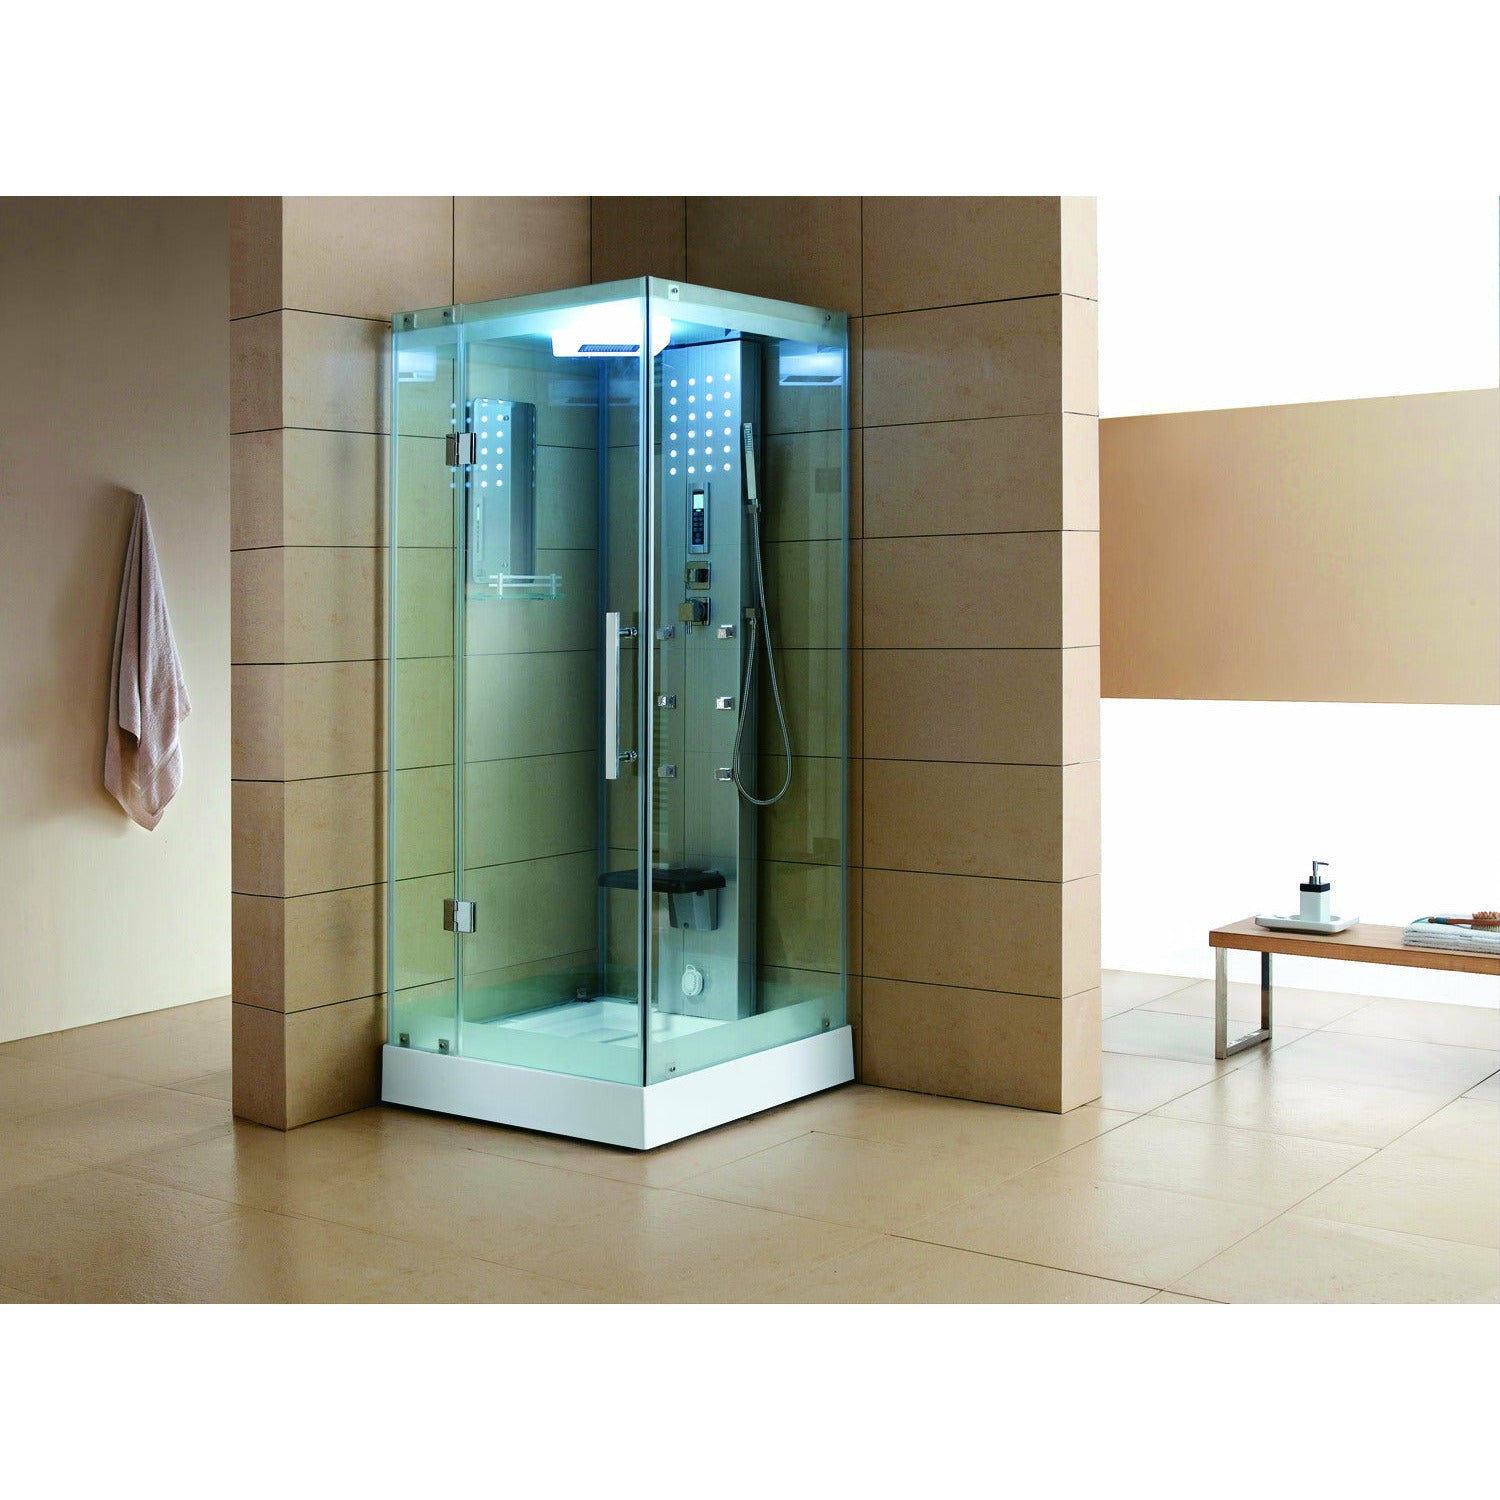 Mesa WS-303 Steam Shower tempered glass on all sides with a polished nickel interior control panel with foldable black center seat, adjustable handheld shower head, rainfall shower head, storage shelves and a fluorescent blue mood lighting